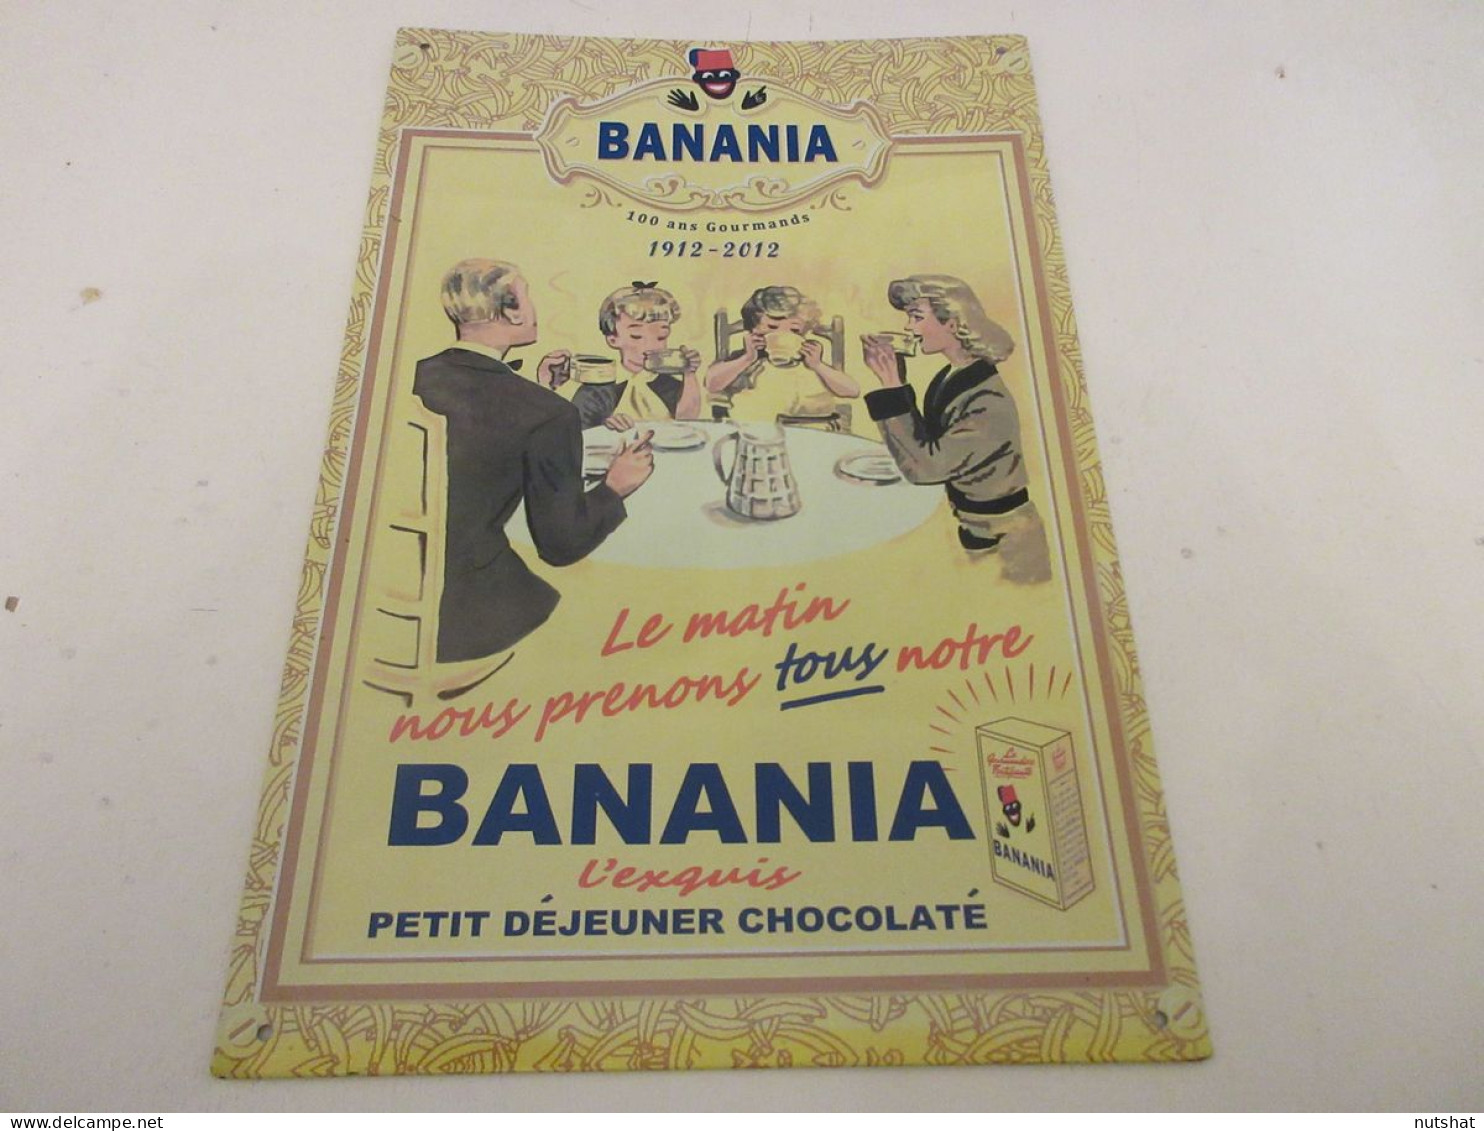 PLAQUE PUBLICITAIRE EMAILLEE BANANIA 100 ANS GOURMANDS 1912-2012 Taille 30x20cm - Emailplaten (vanaf 1961)